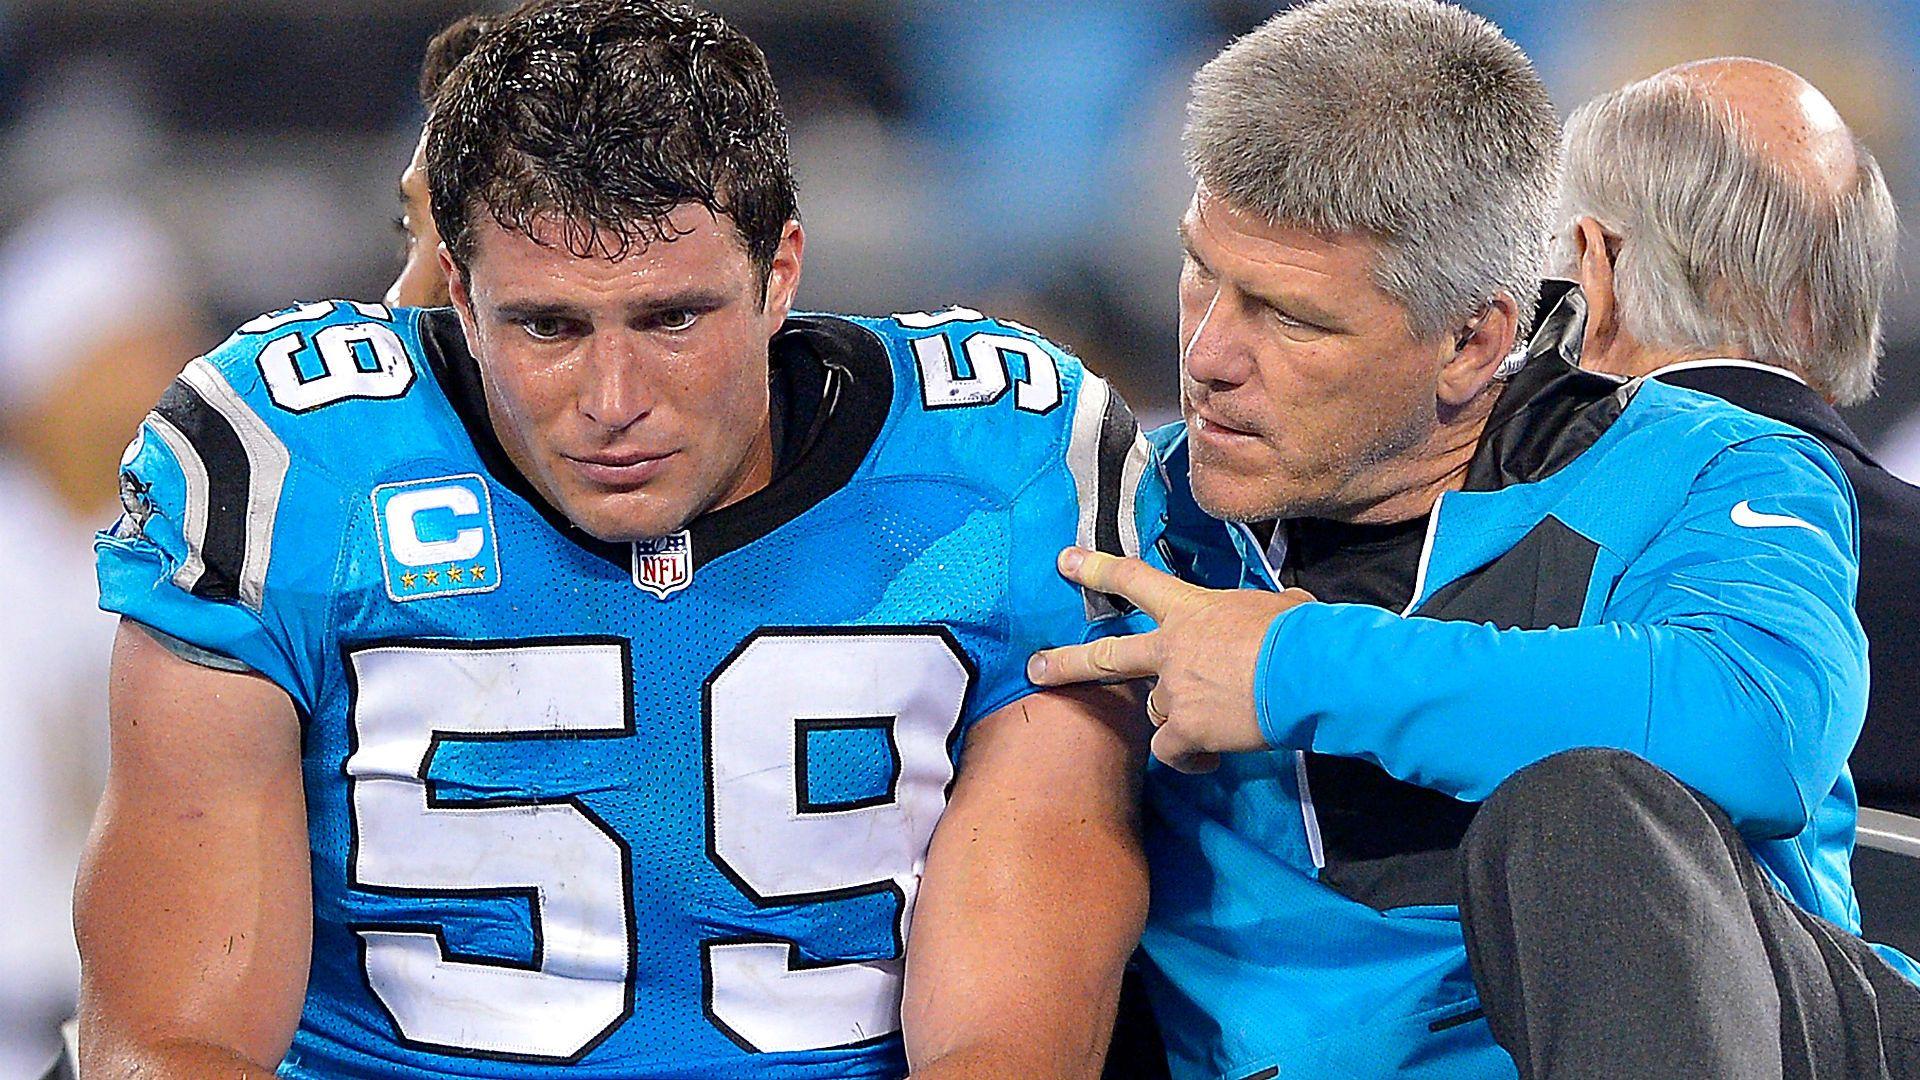 Luke Kuechly goes down, Panthers go from hangover to heartbreak